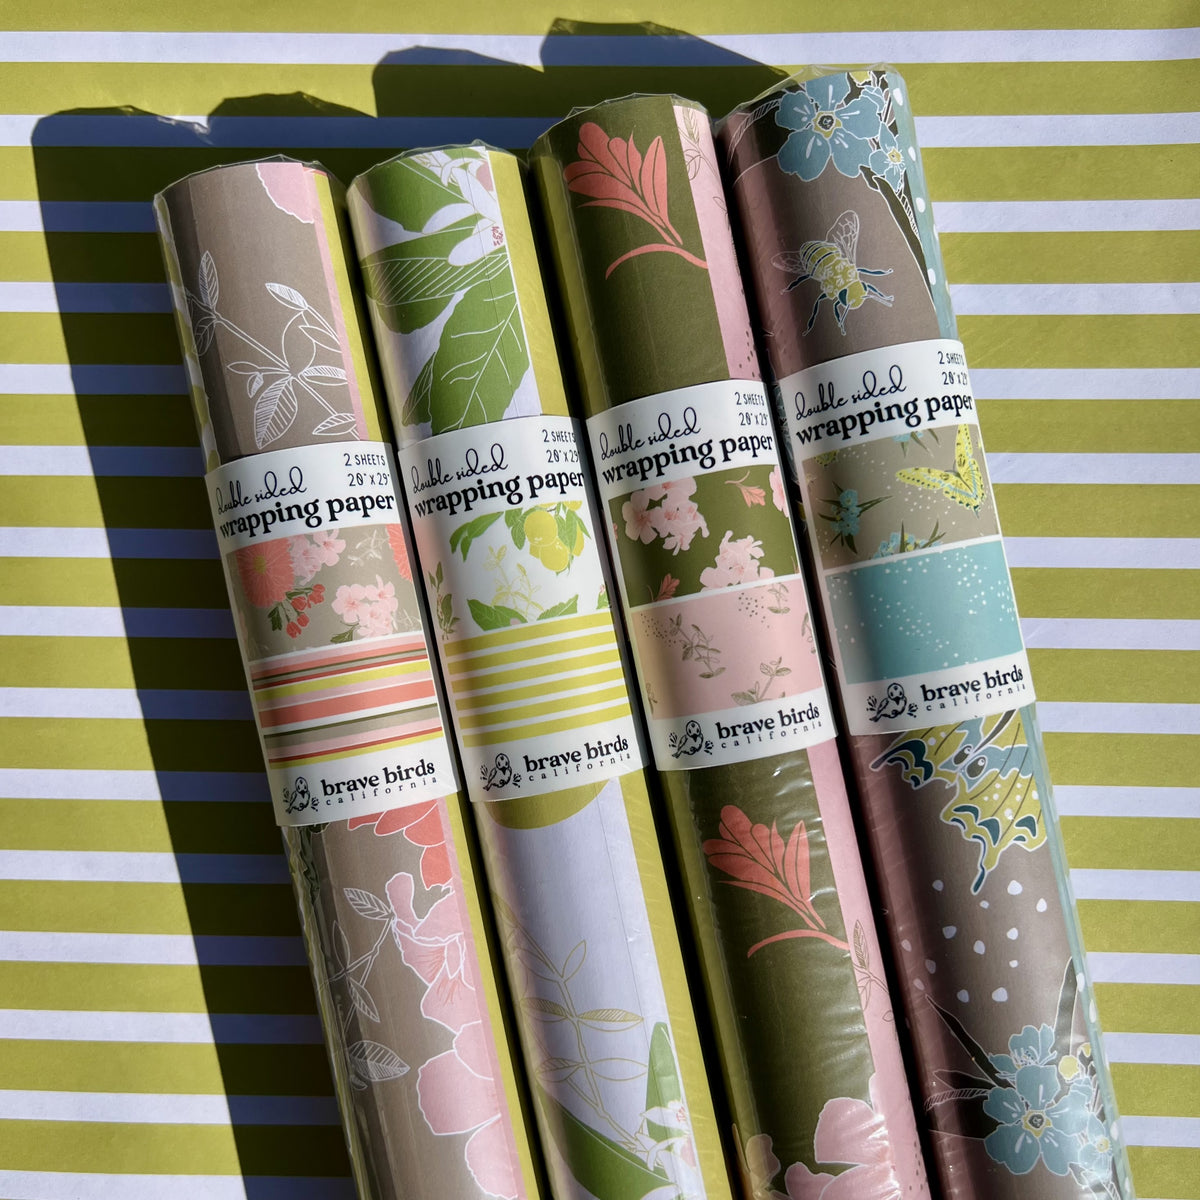 Packaged rolls of all 4 pattern options of double sided wrapping paper